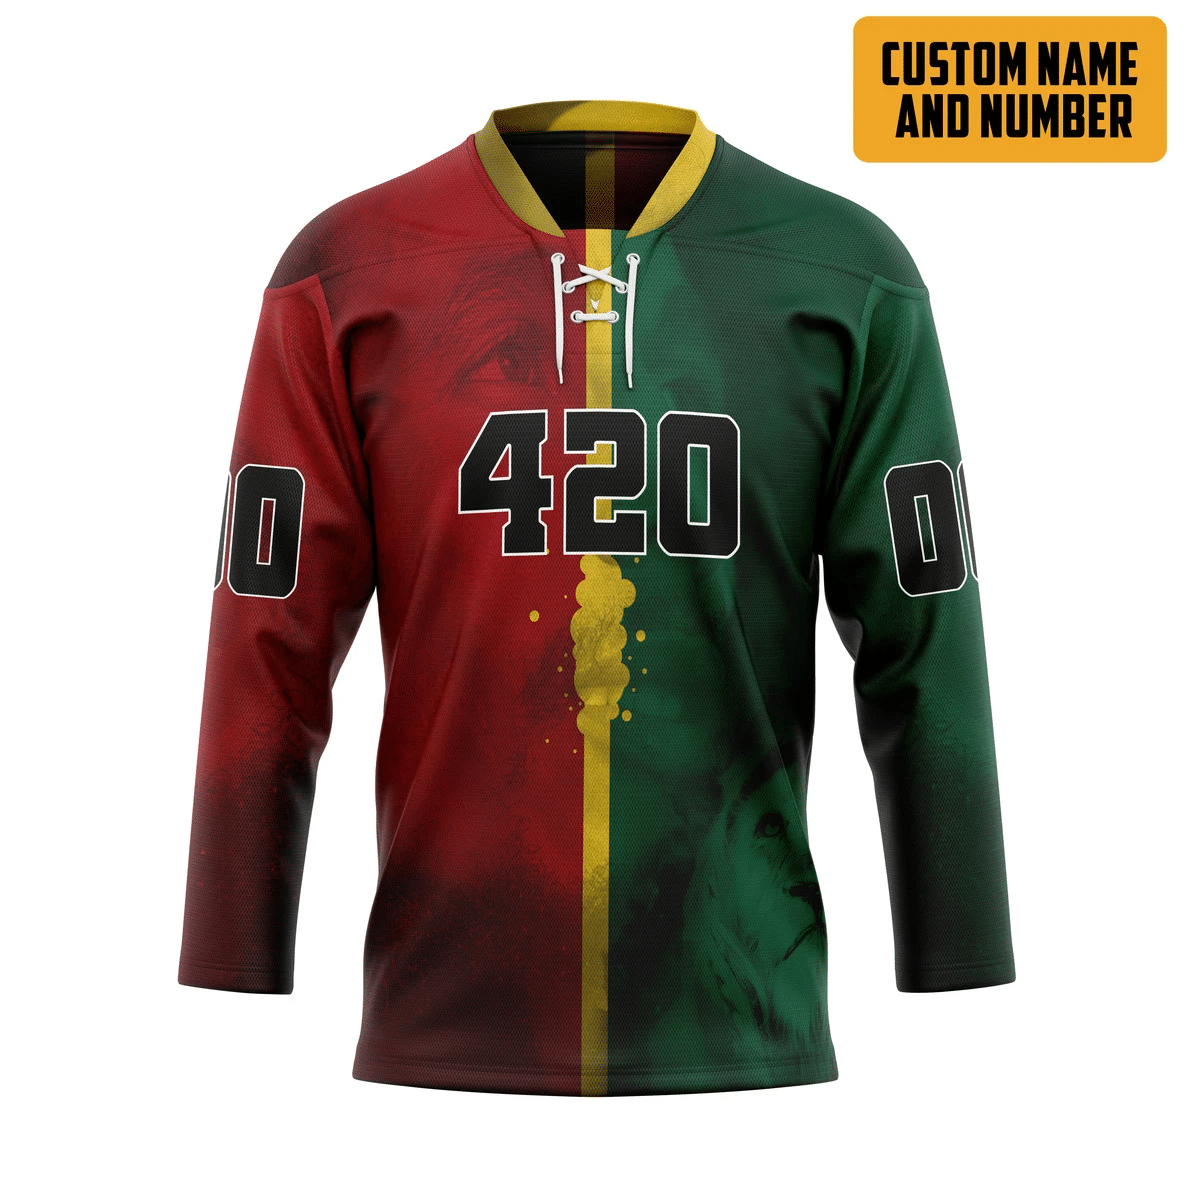 Top hot hockey jersey for NHL fans You can find out more at the bottom of the page! 149